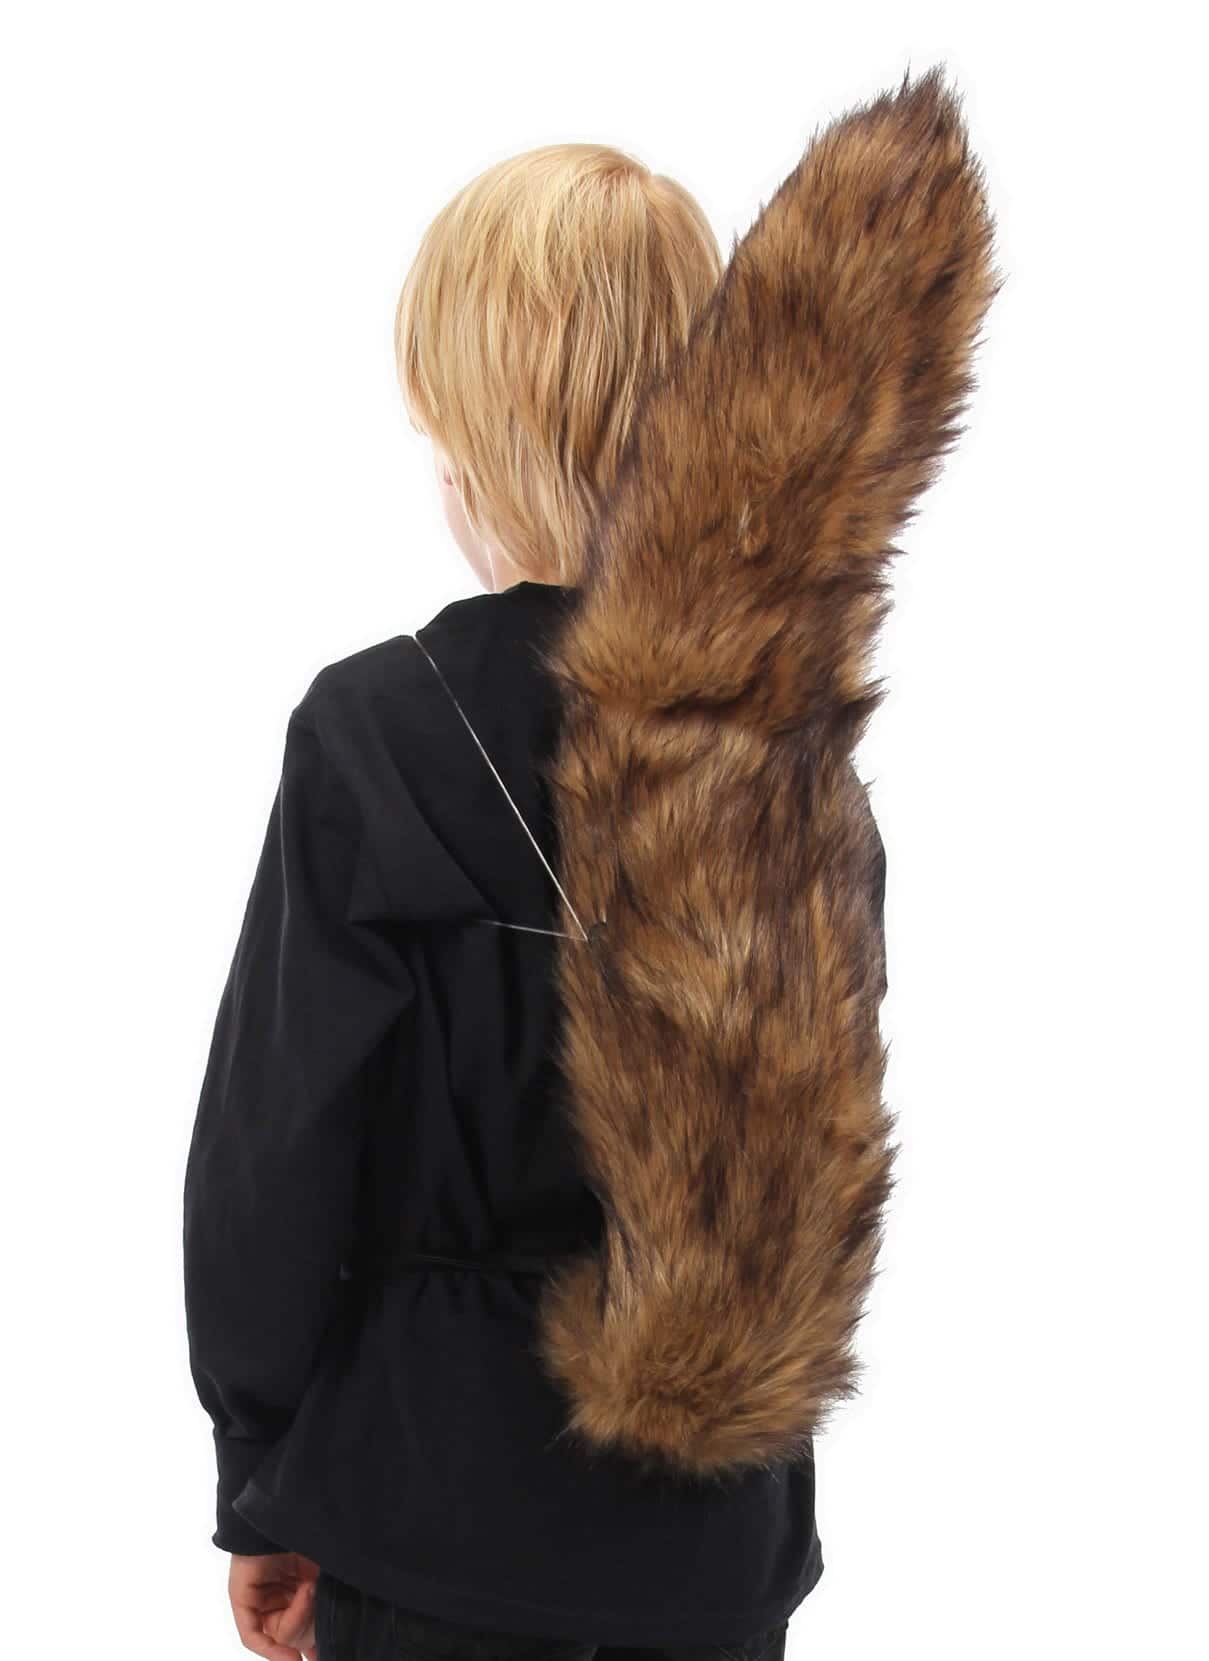 Deluxe Squirrel Plush Tail 4